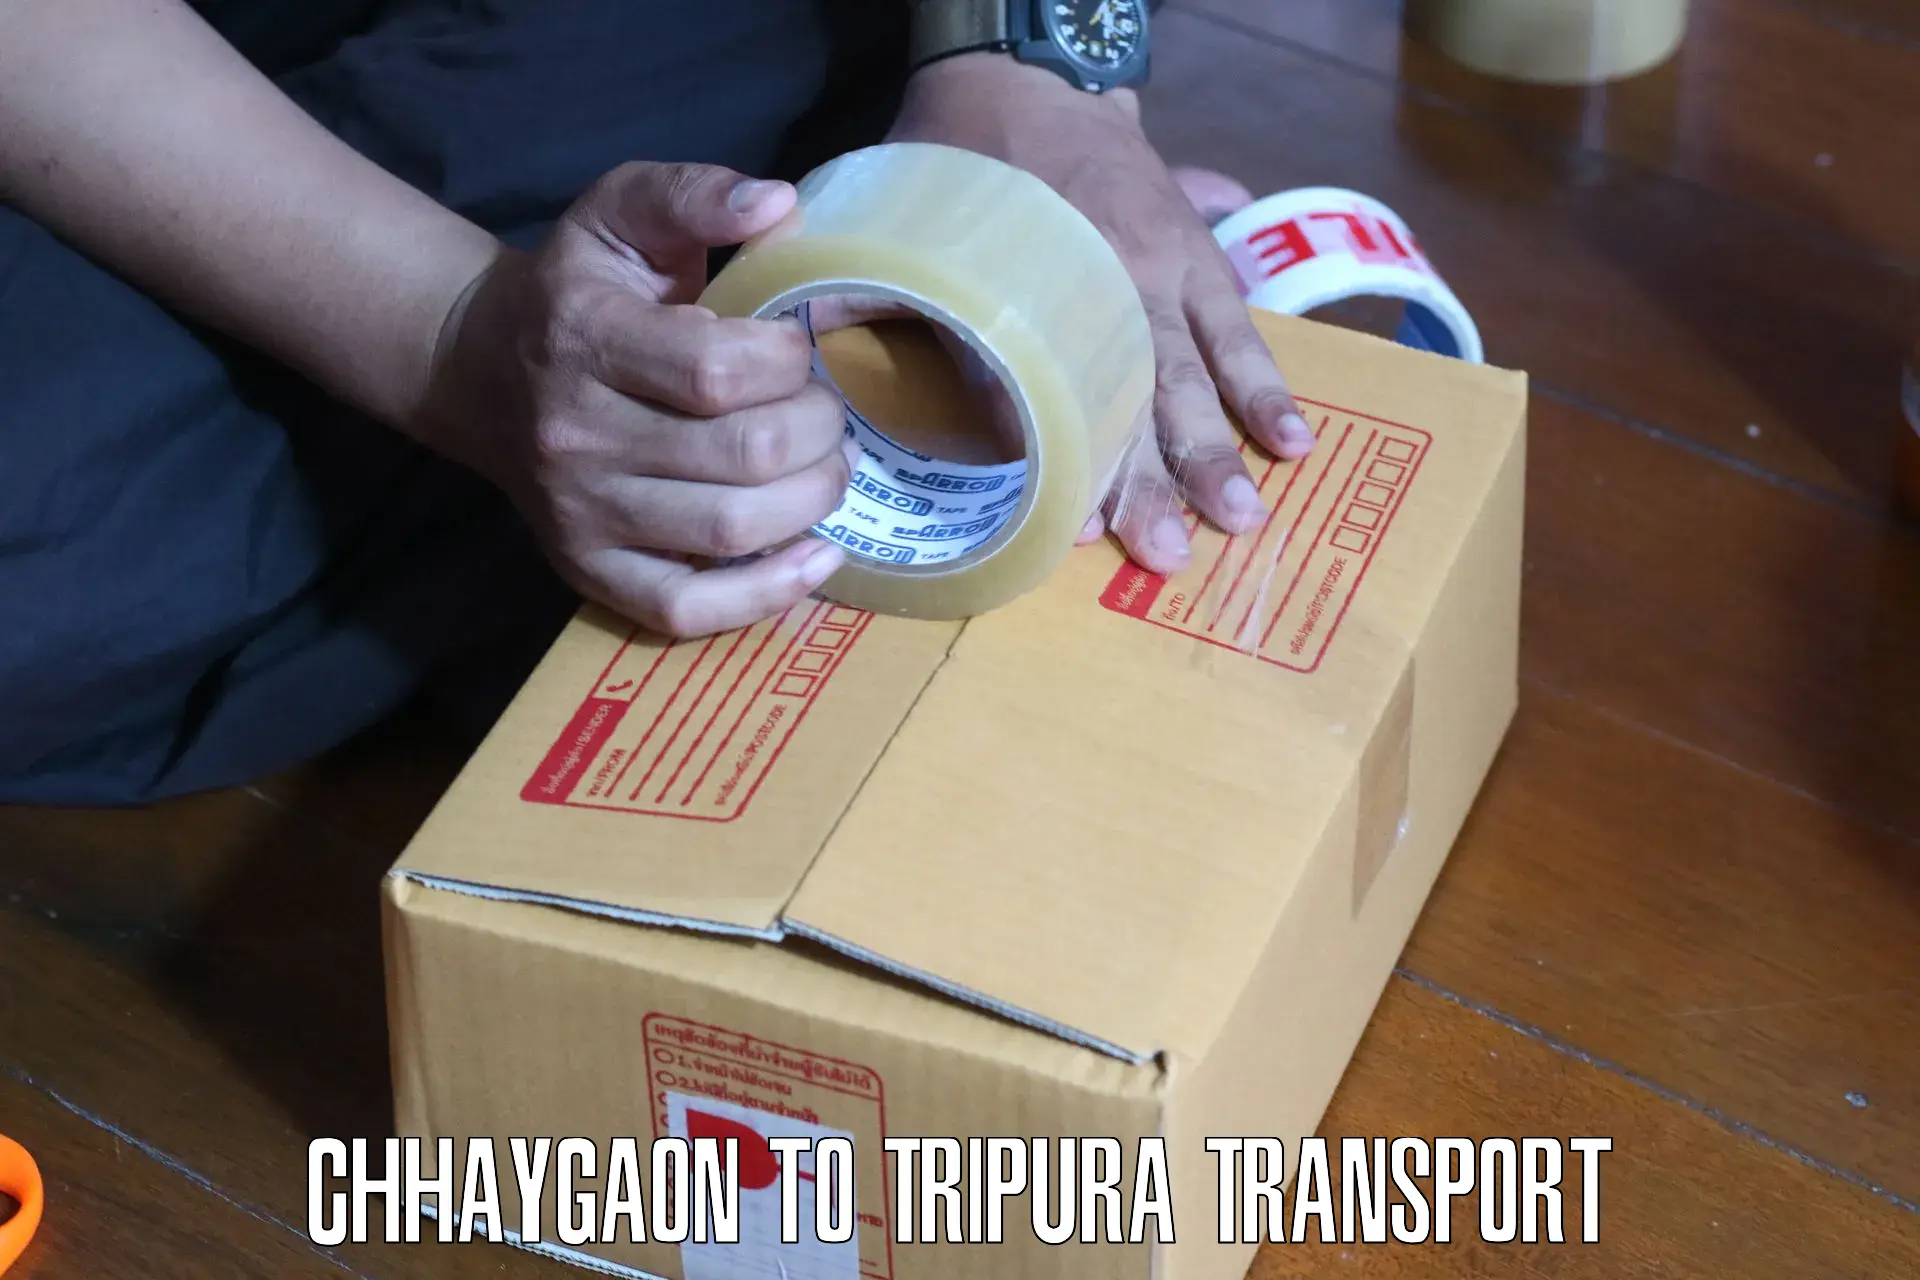 Air freight transport services Chhaygaon to Udaipur Tripura